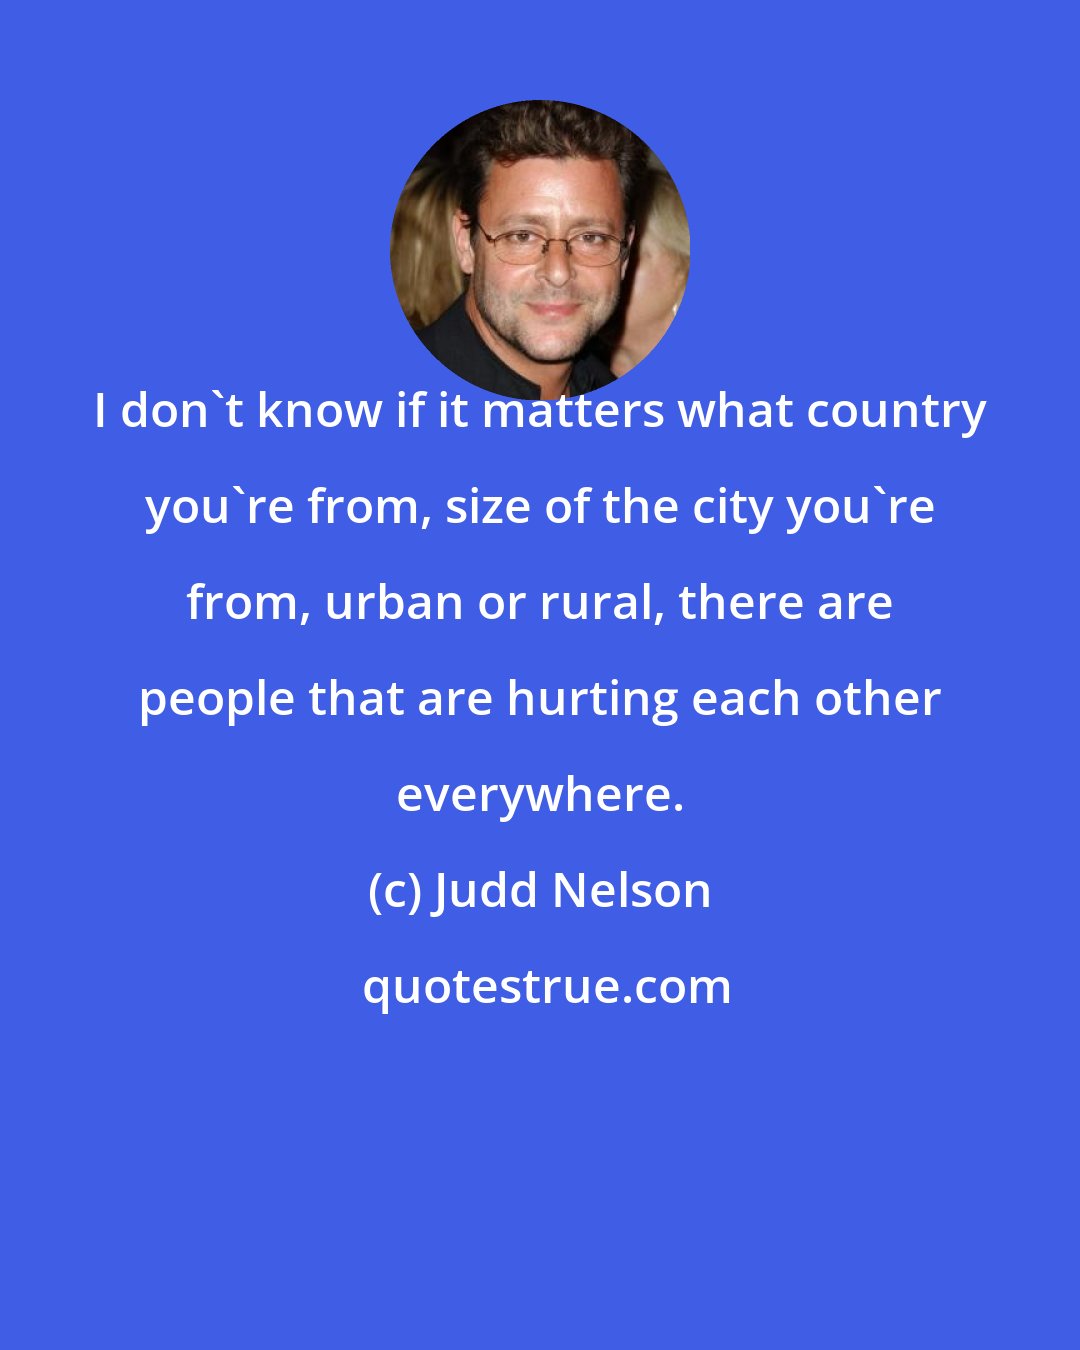 Judd Nelson: I don't know if it matters what country you're from, size of the city you're from, urban or rural, there are people that are hurting each other everywhere.